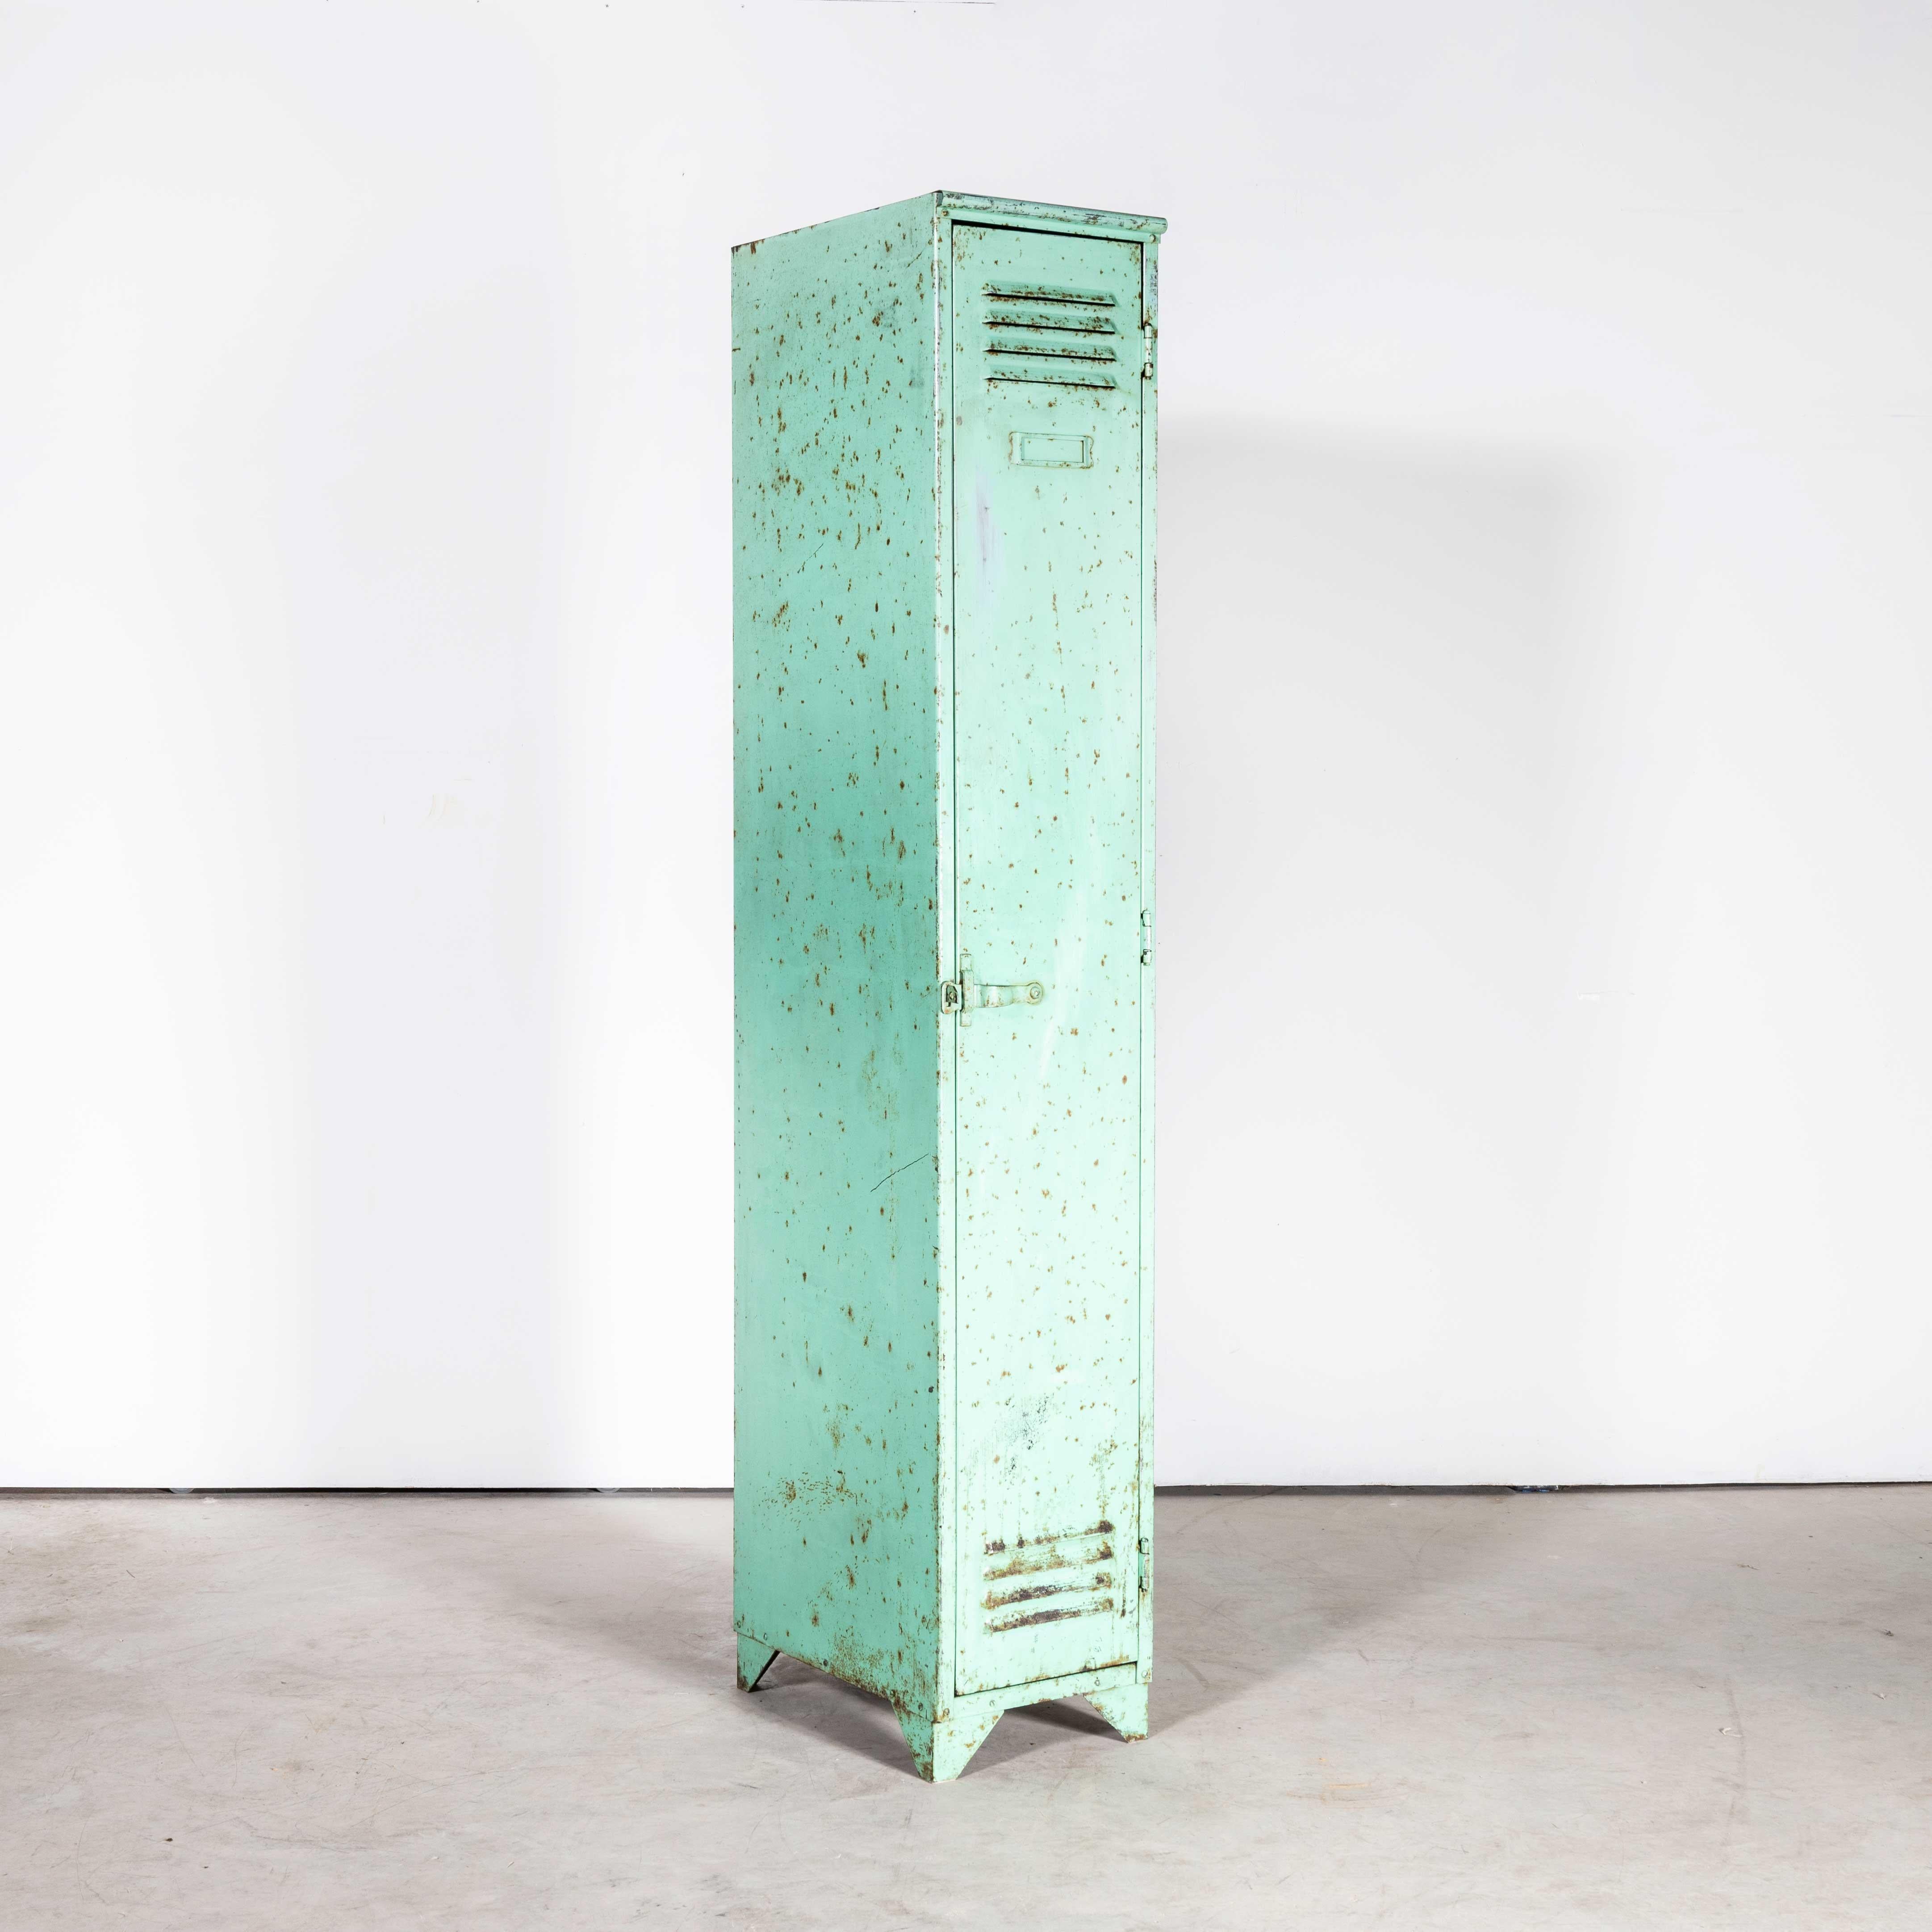 1950s Single Industrial Metal Locker – Mint Green
1950s Single Industrial Metal Locker – Mint Green. We have always had a soft spot for a good locker. Single ones are just a very practical shape and Size and can be tucked into a corner and used for